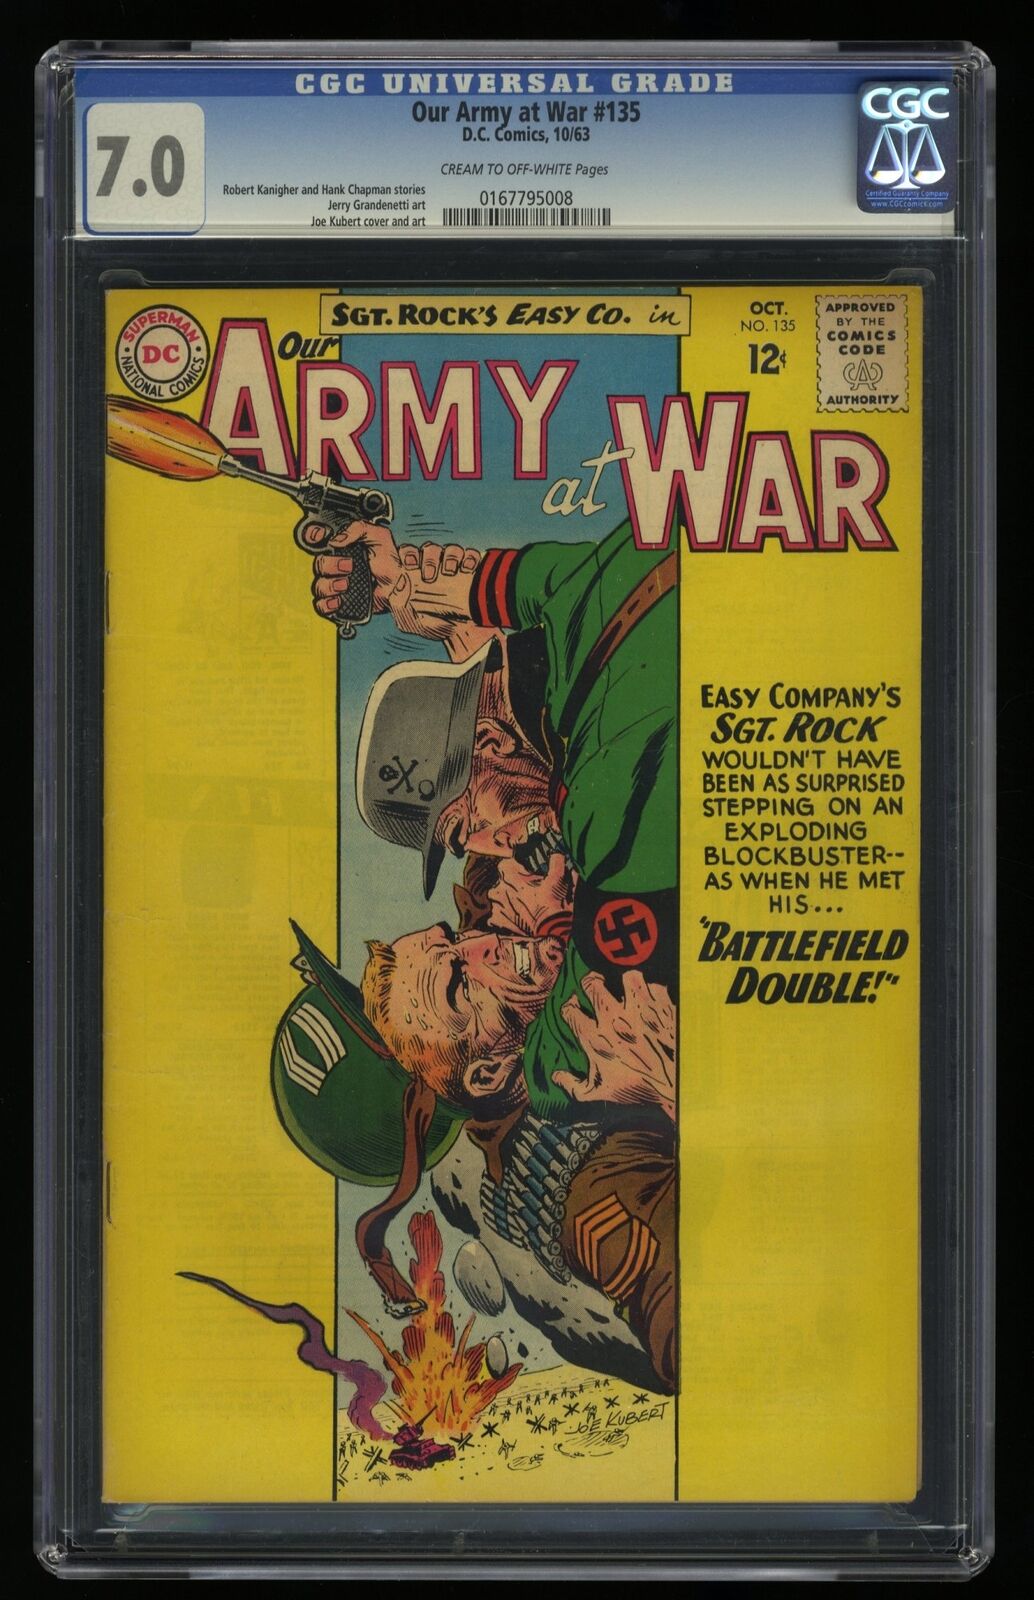 Our Army at War #135 CGC FN/VF 7.0 Cream To Off White DC Comics 1963